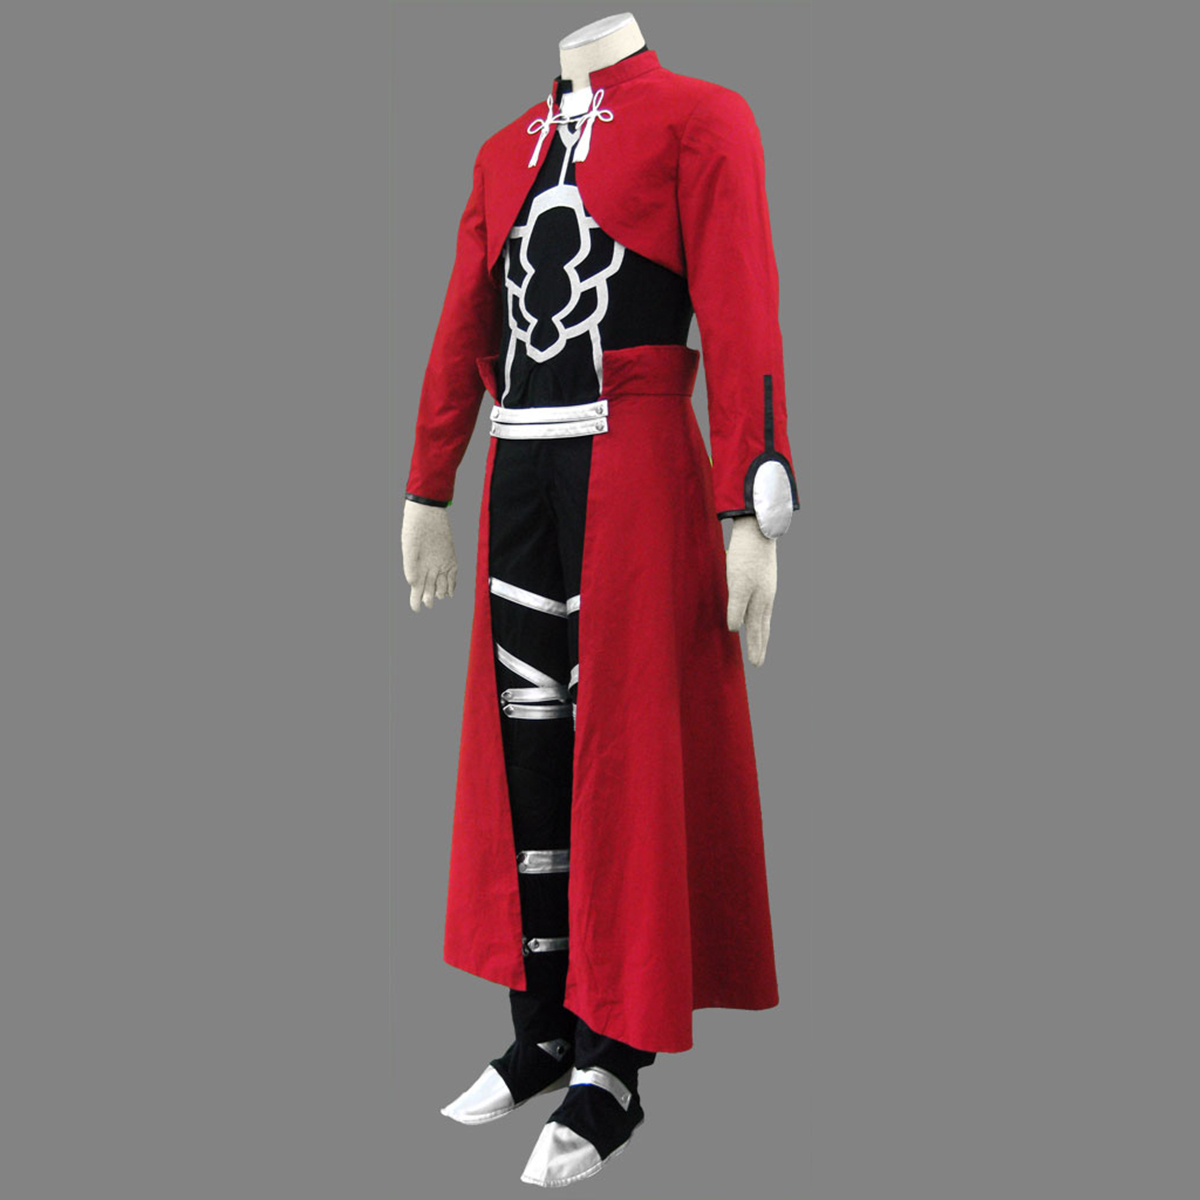 The Holy Grail War Archer Anime Cosplay Costumes Outfit